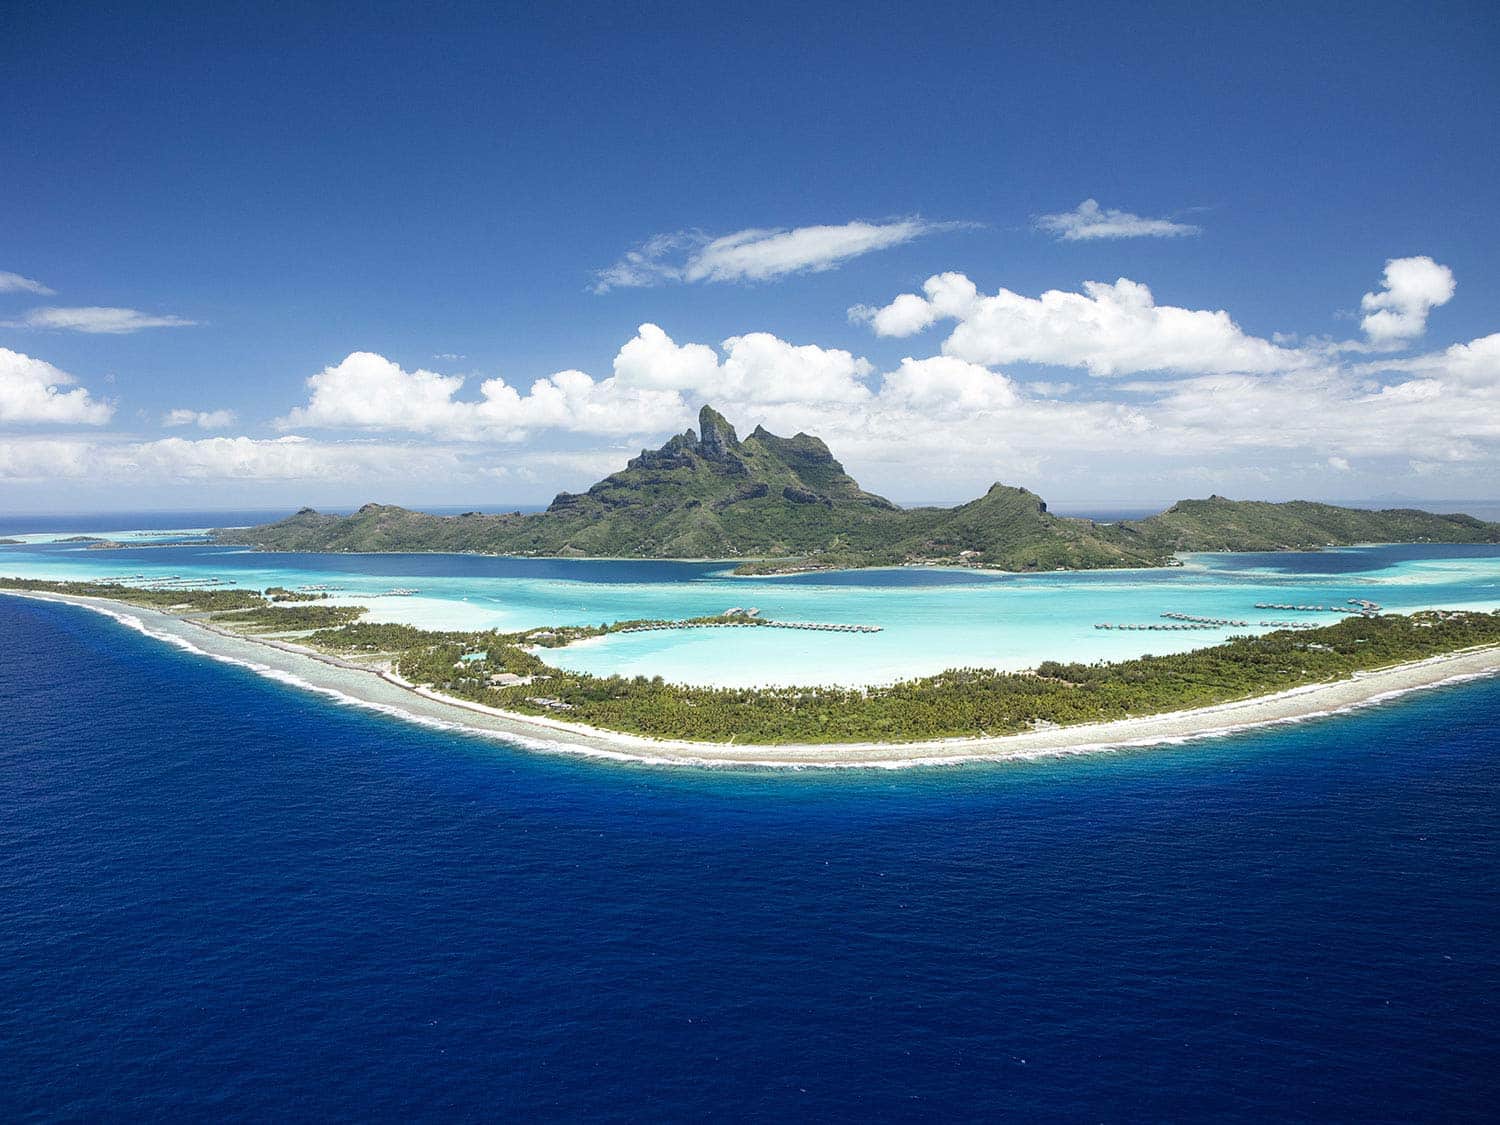 A large panoramic landscape of a beach and islands surrounded by the ocean.